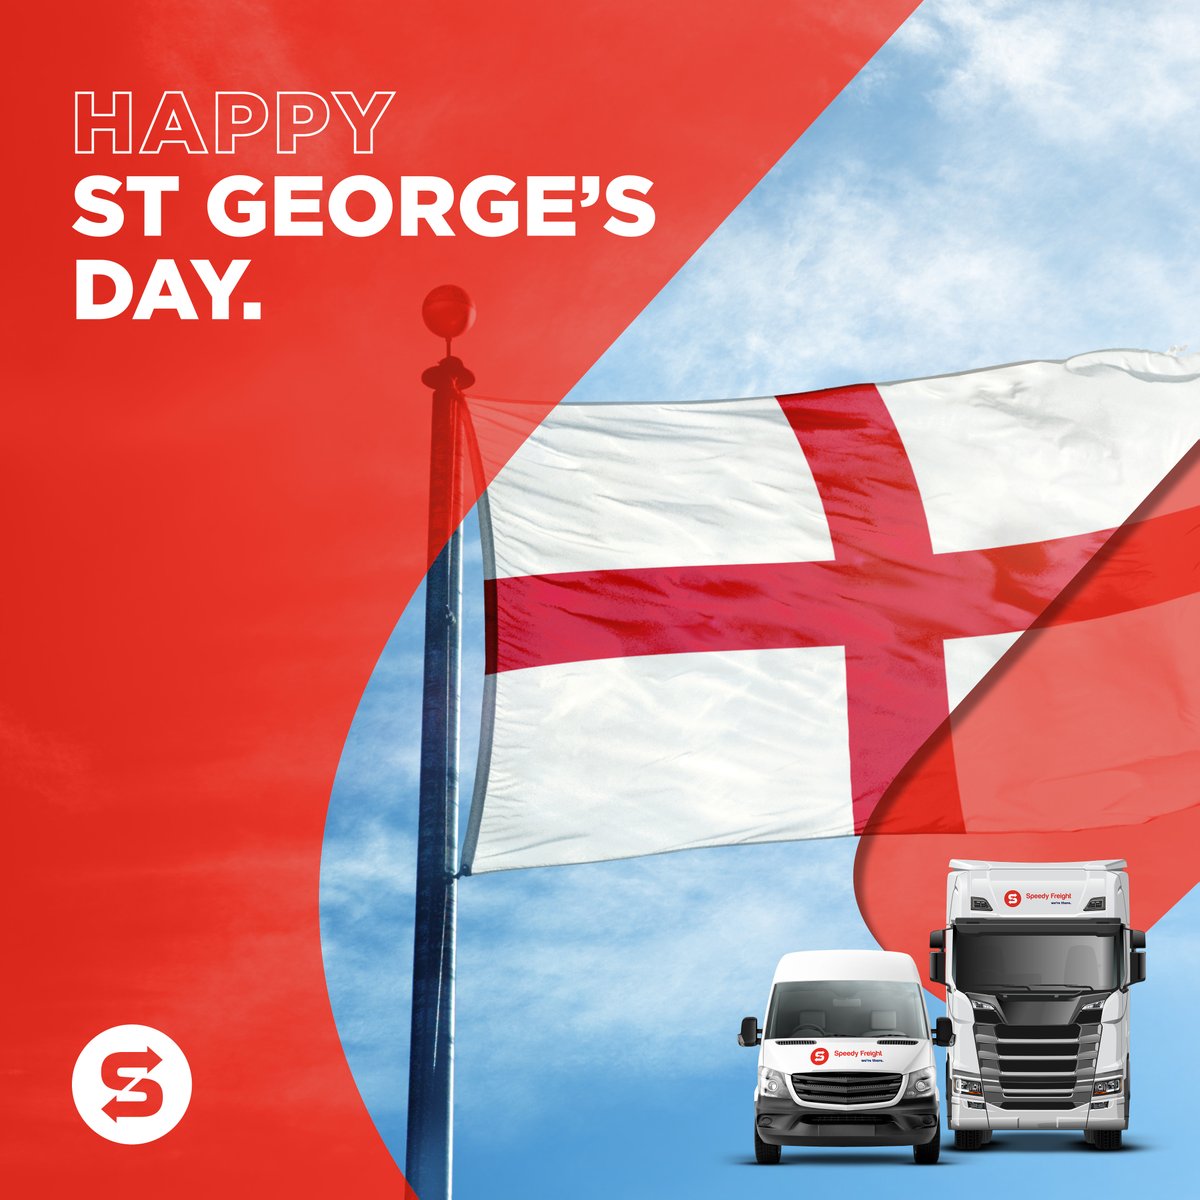 Happy St. George’s Day! ➡️ Need something delivered today? Contact your local Speedy Freight branch: hubs.la/Q02tLk640 #SameDayDelivery #SameDayCourier #SpeedyFreight #Transport #Logistics